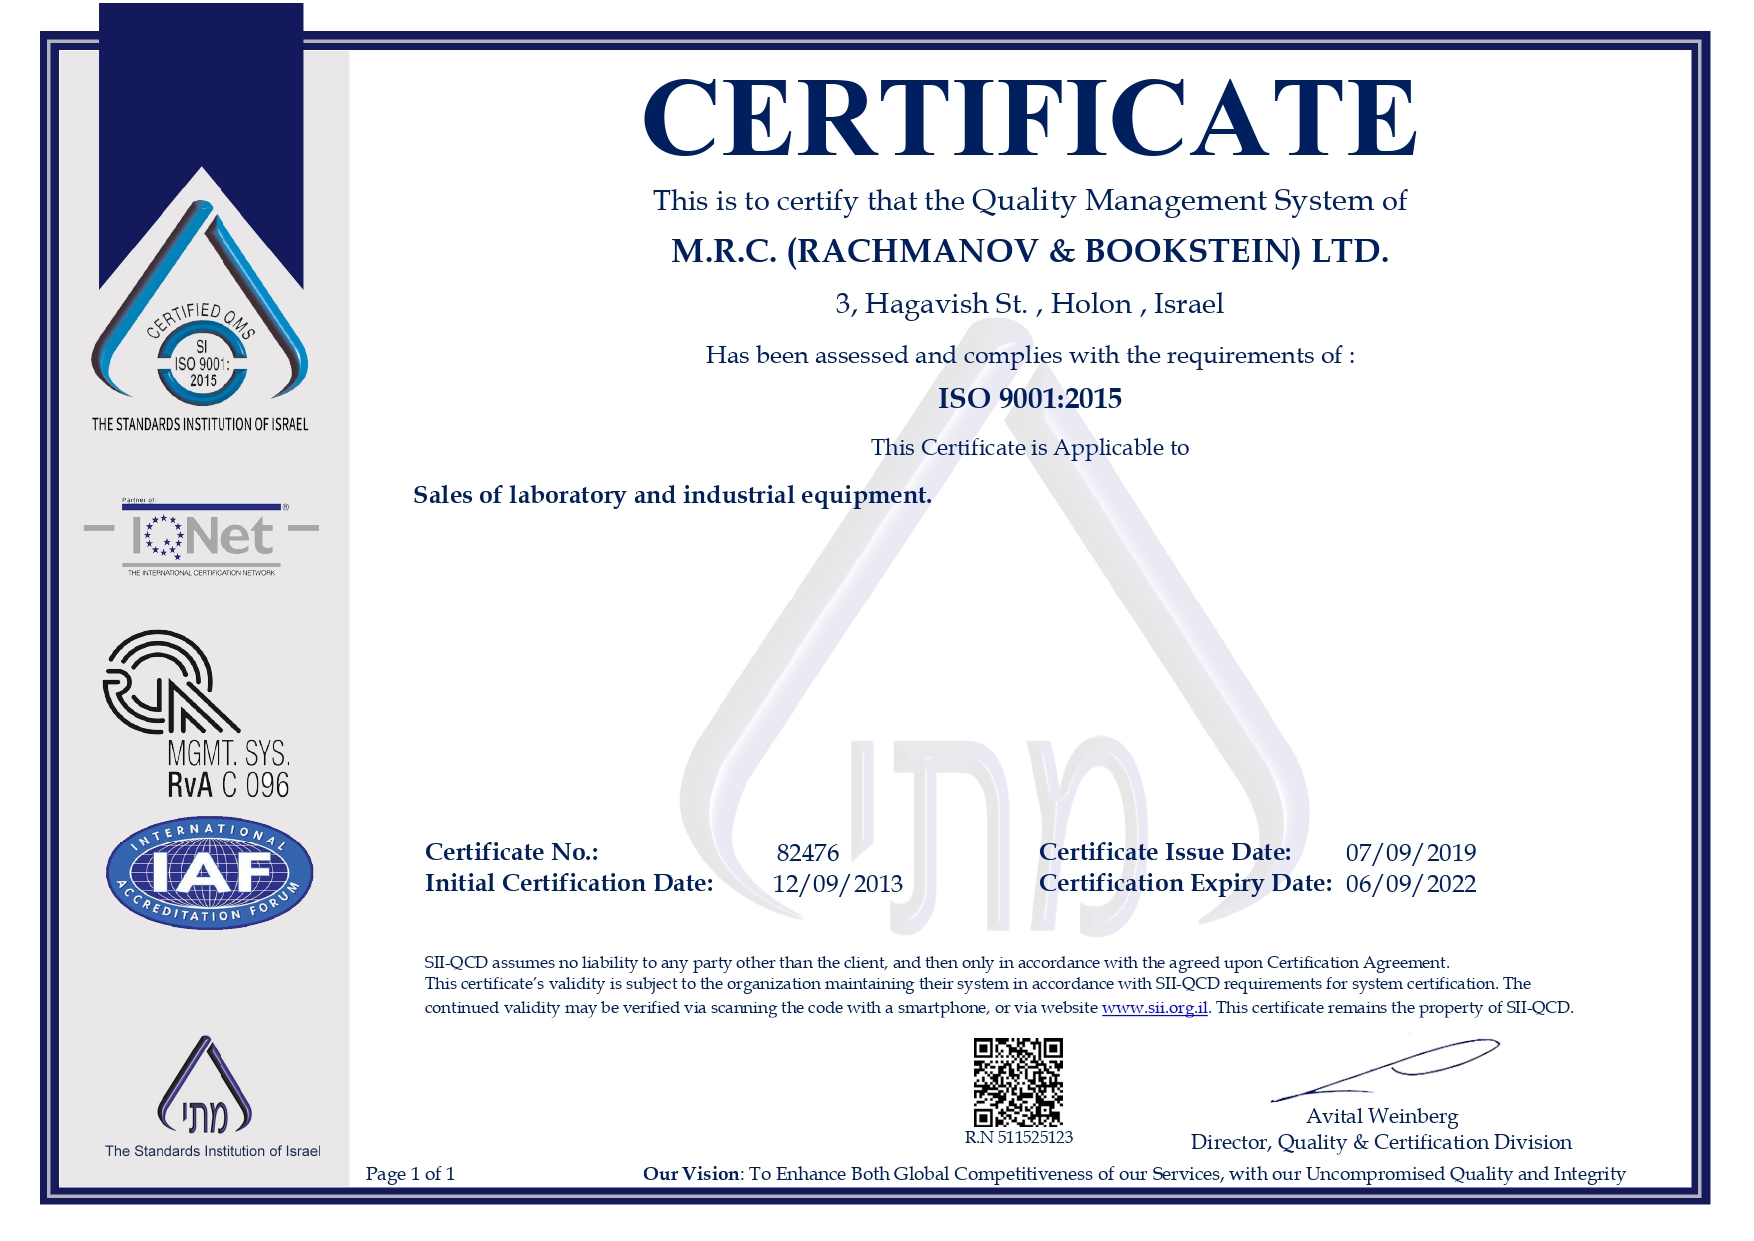 ABOUT MRC ISO